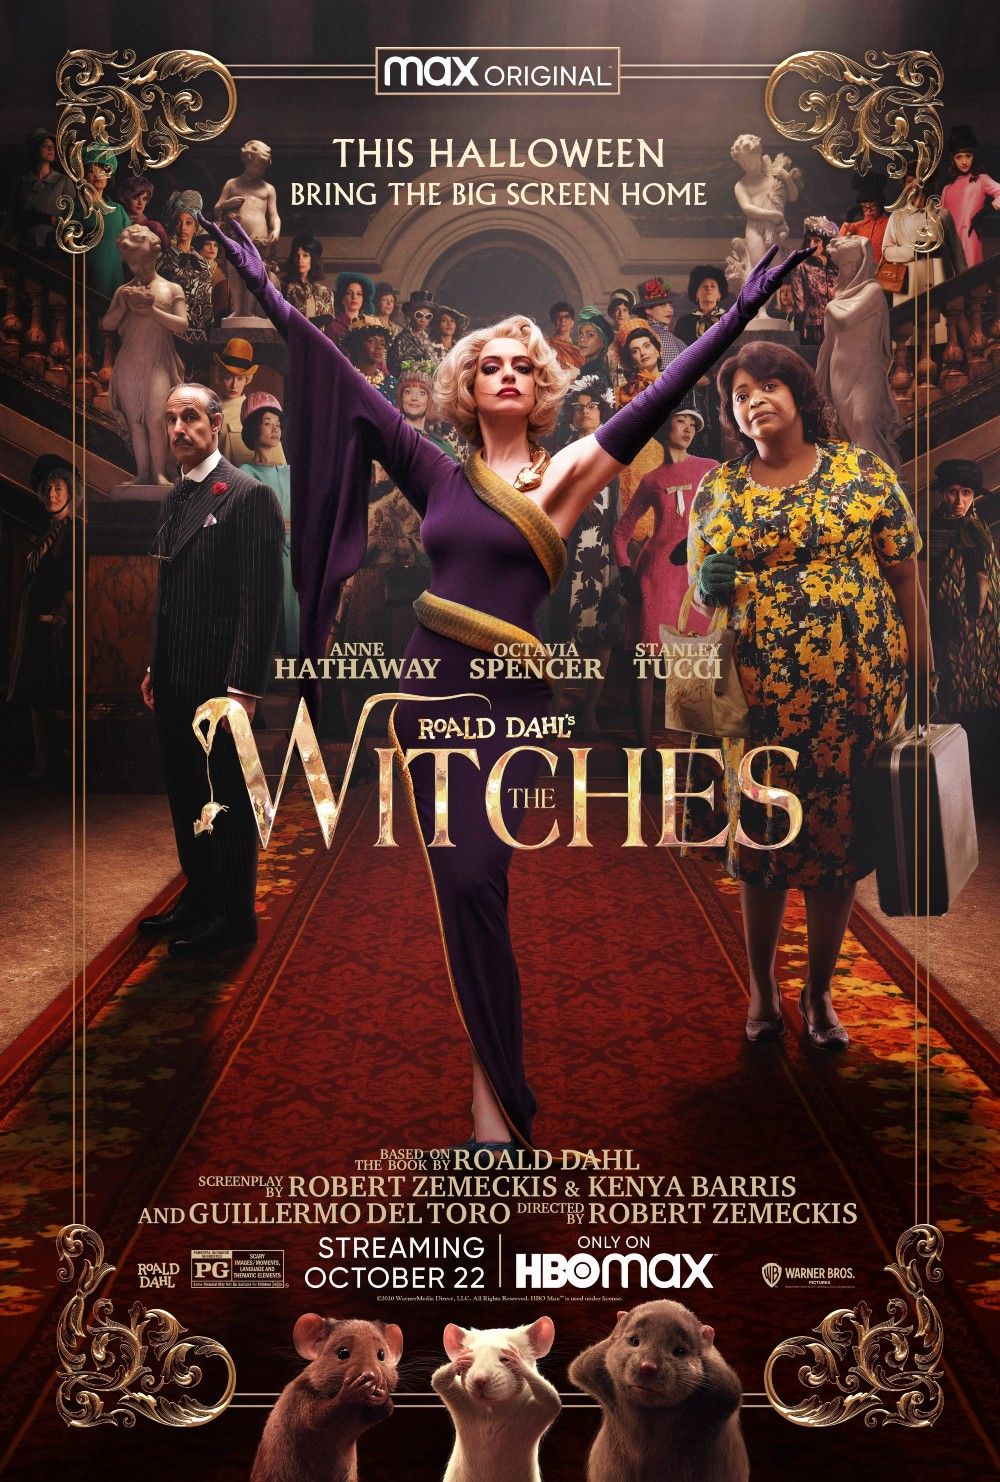 The Witches remake poster full size starring Octavia Spencer Anne Hathaway Stanley Tucci Chris Rock